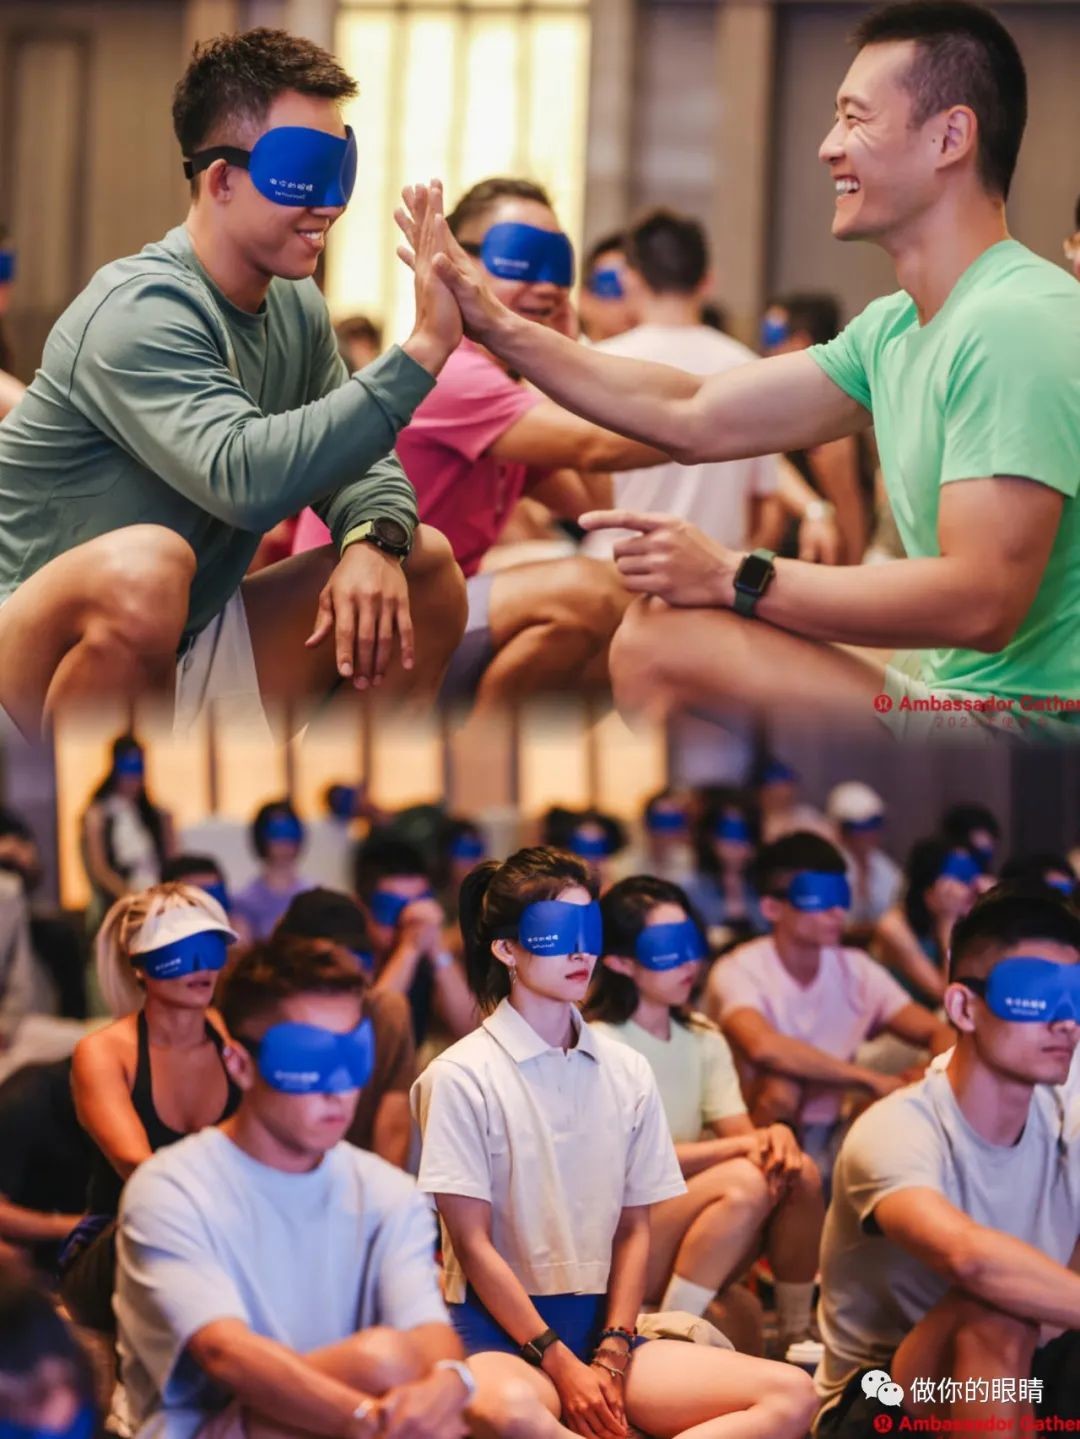 lululemon大使体验视障伙伴世界 Lululemon ambassadors seeing the world from the perspectives of the visually impaired